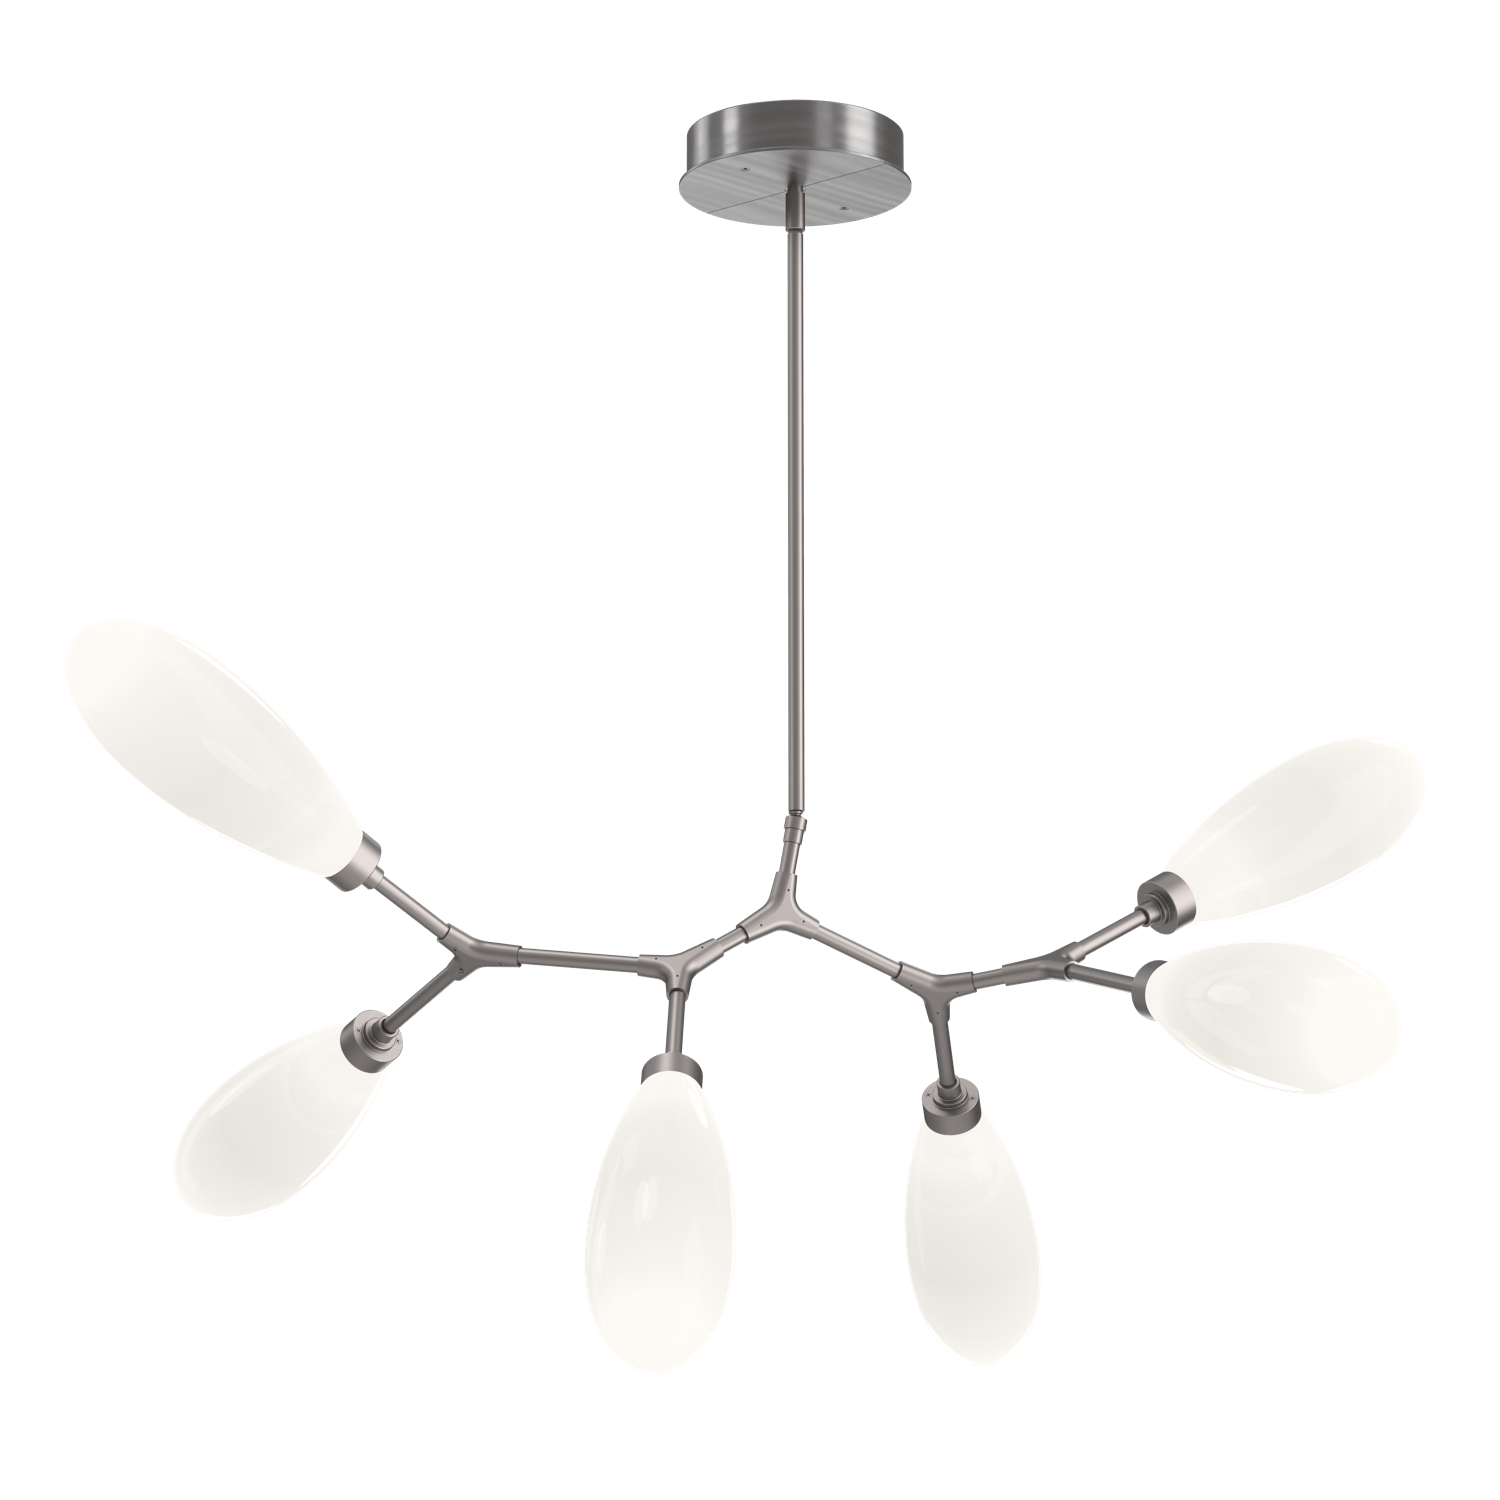 PLB0071-BA-SN-WL-LL-Hammerton-Studio-Fiori-6-light-organic-branch-chandelier-with-satin-nickel-finish-and-opal-white-glass-shades-and-LED-lamping